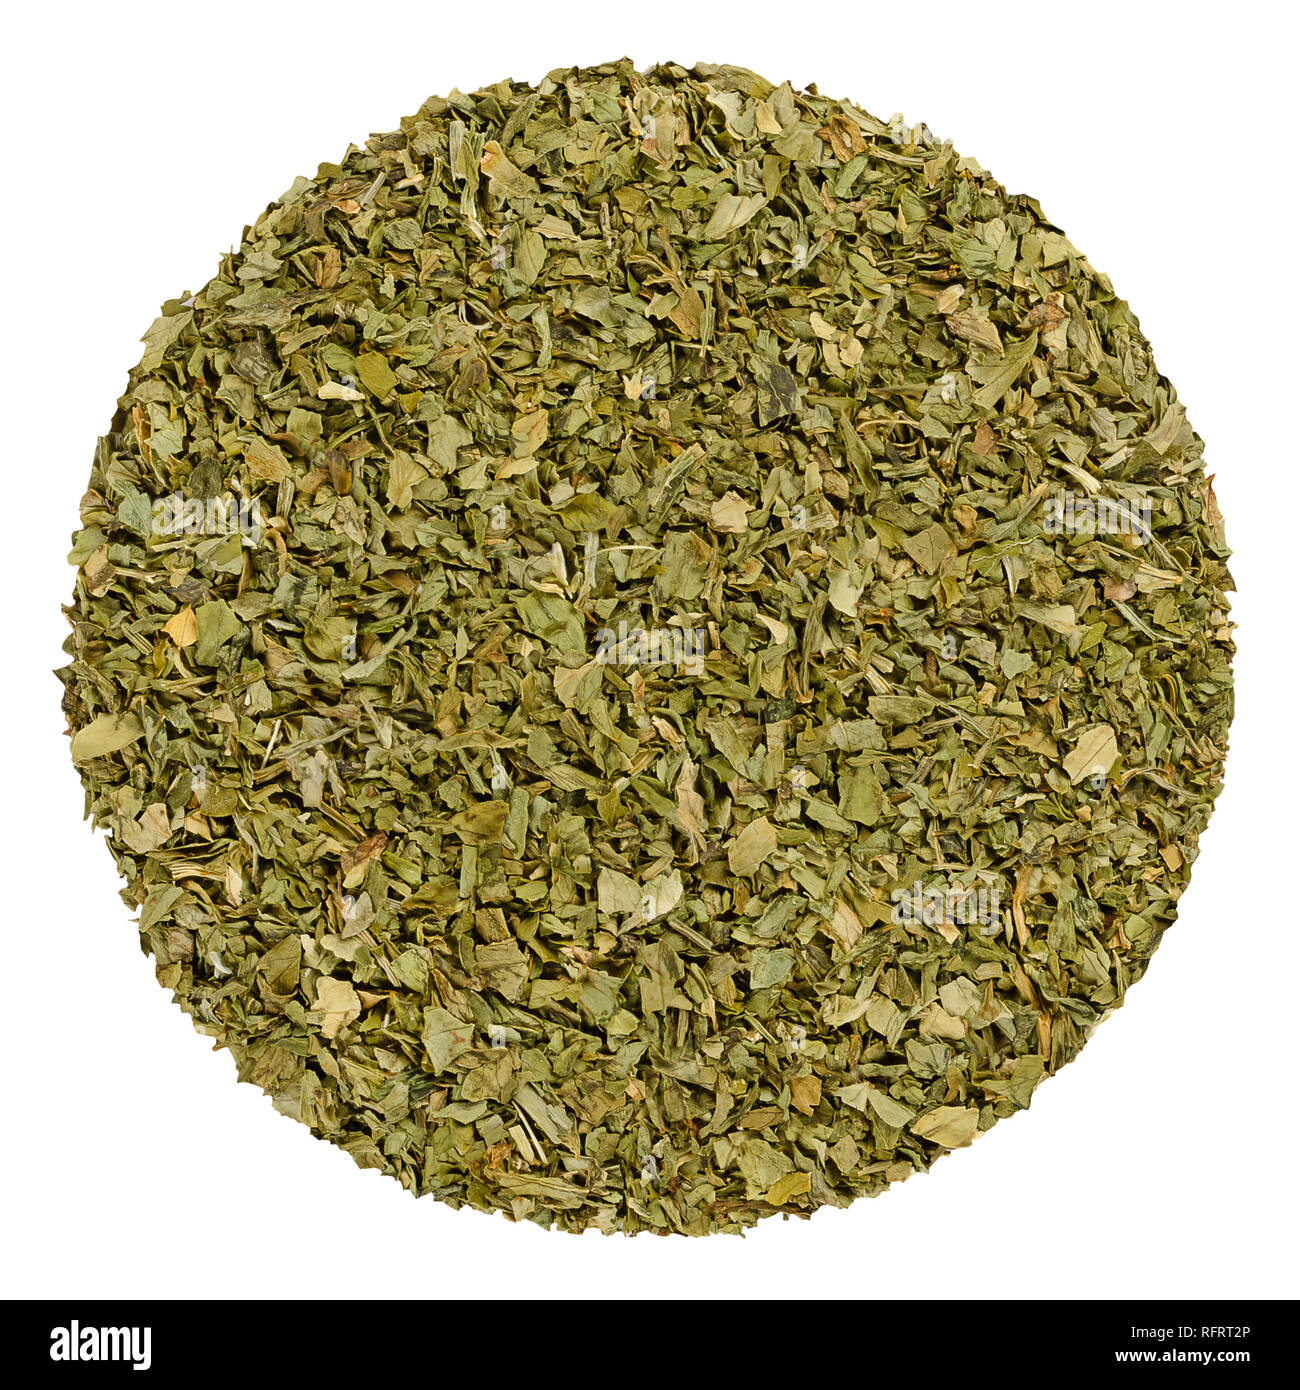 Dried lovage. Herb circle from above, isolated, over white. Disc made of grated lovage leaves, Levisticum officinale. Edible green herb and vegetable. Stock Photo